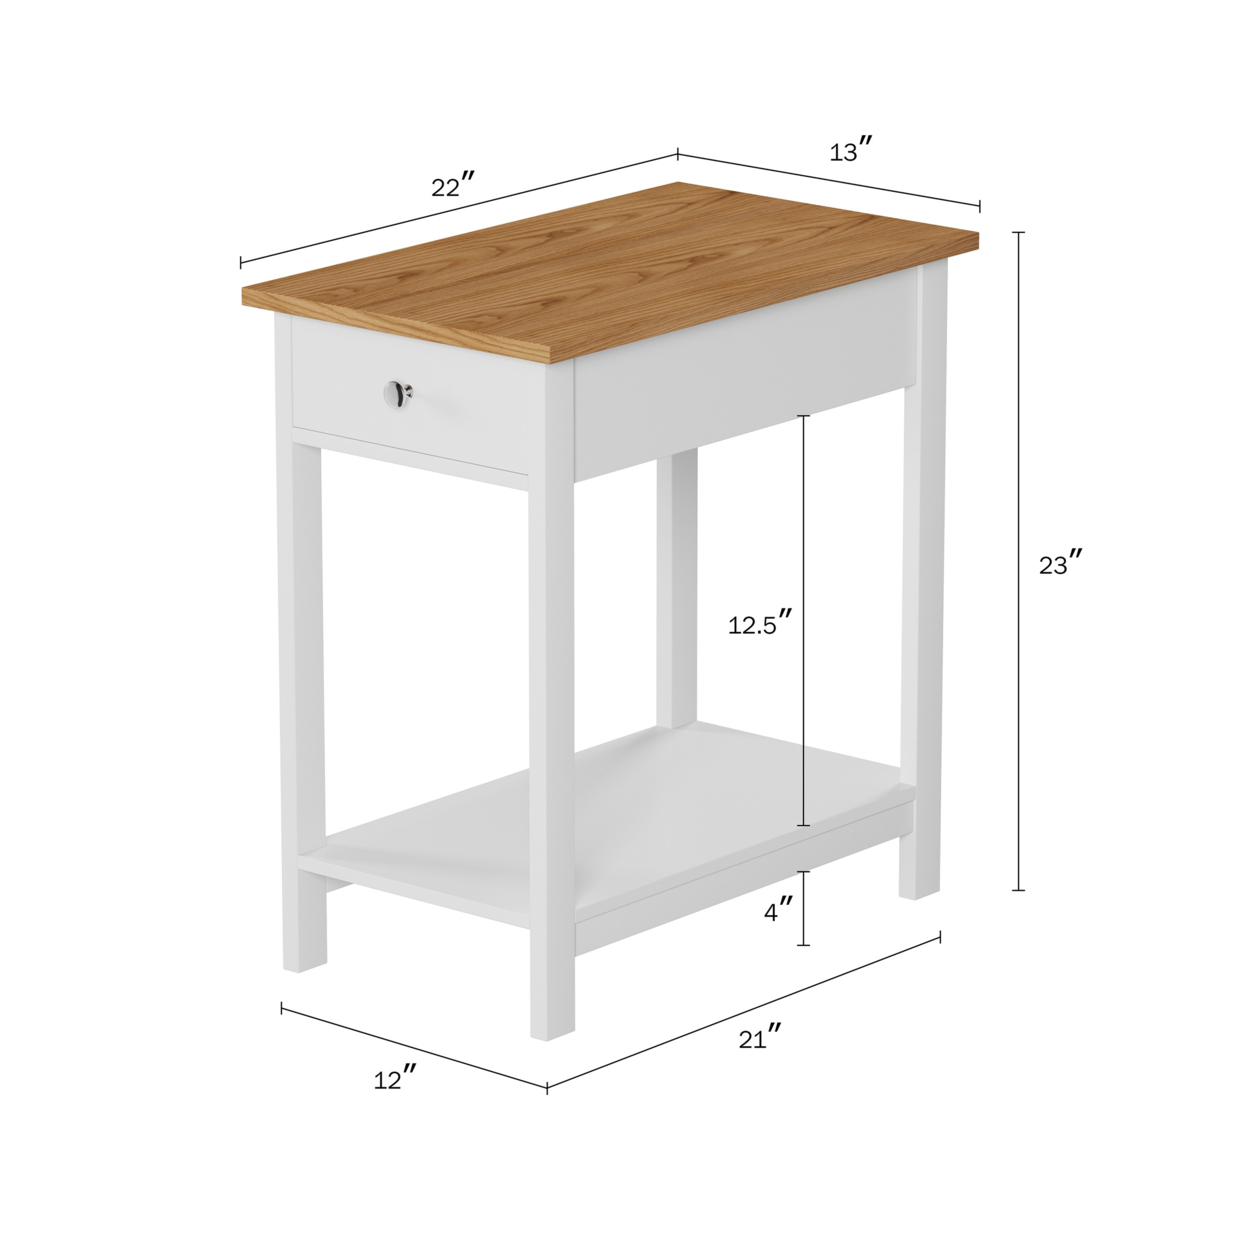 Side Table With Drawer- Narrow End Table With Storage Shelf- 2 Toned Wood Stand For Bedroom, Living Room & Entryway